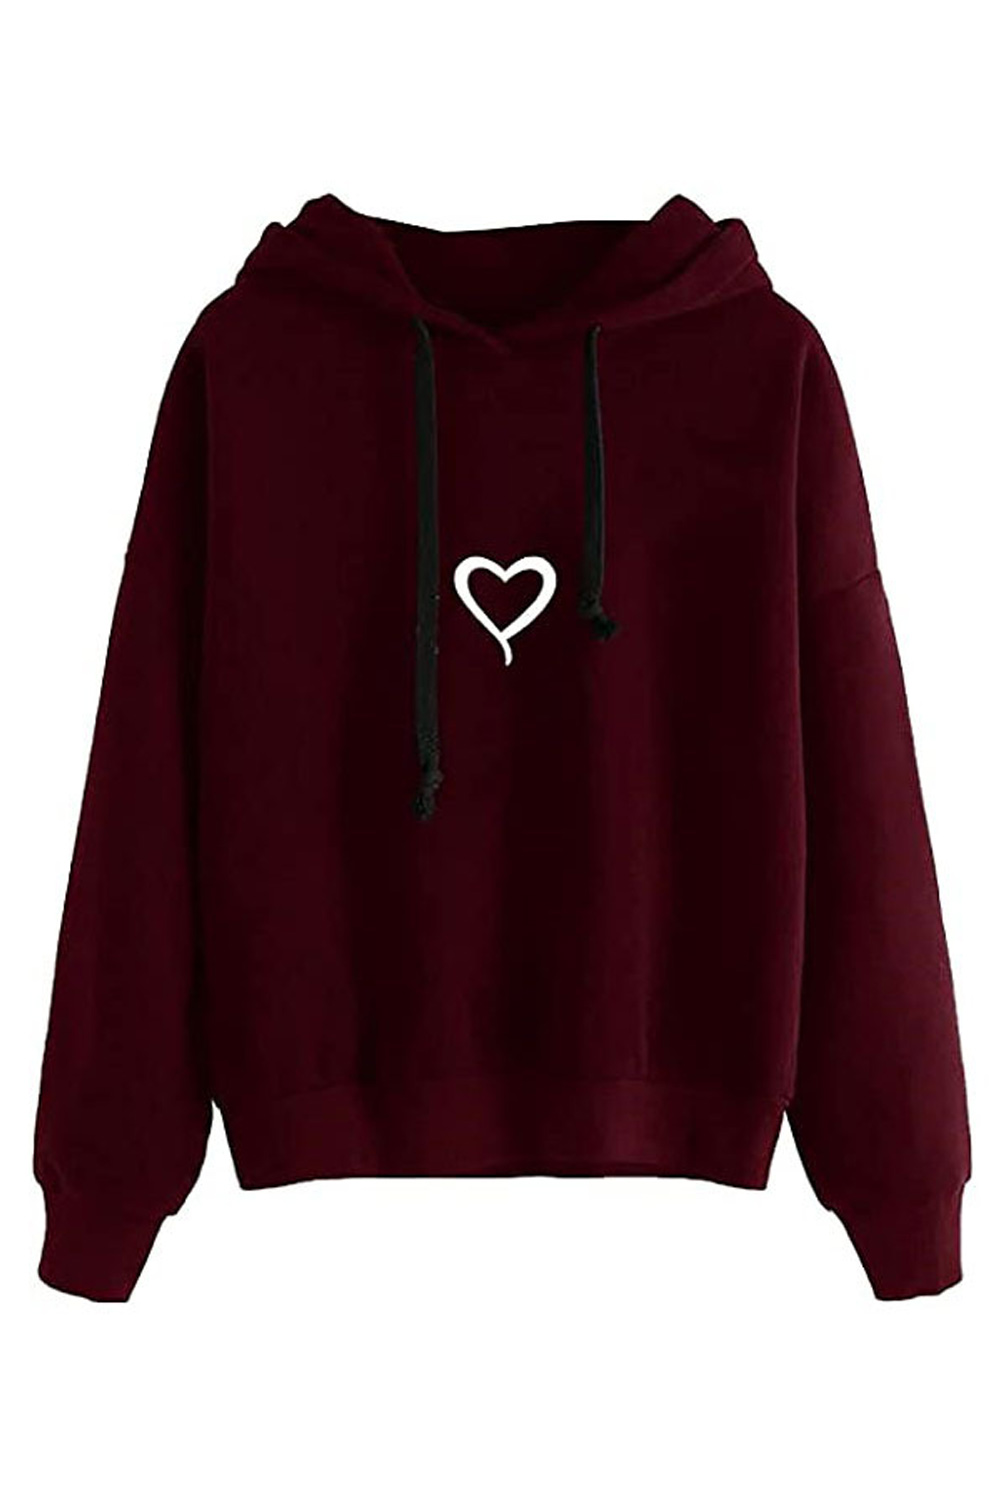 Jhon Peters Women Lovely Solid Color Heart Printed Regular Fit Hoodie